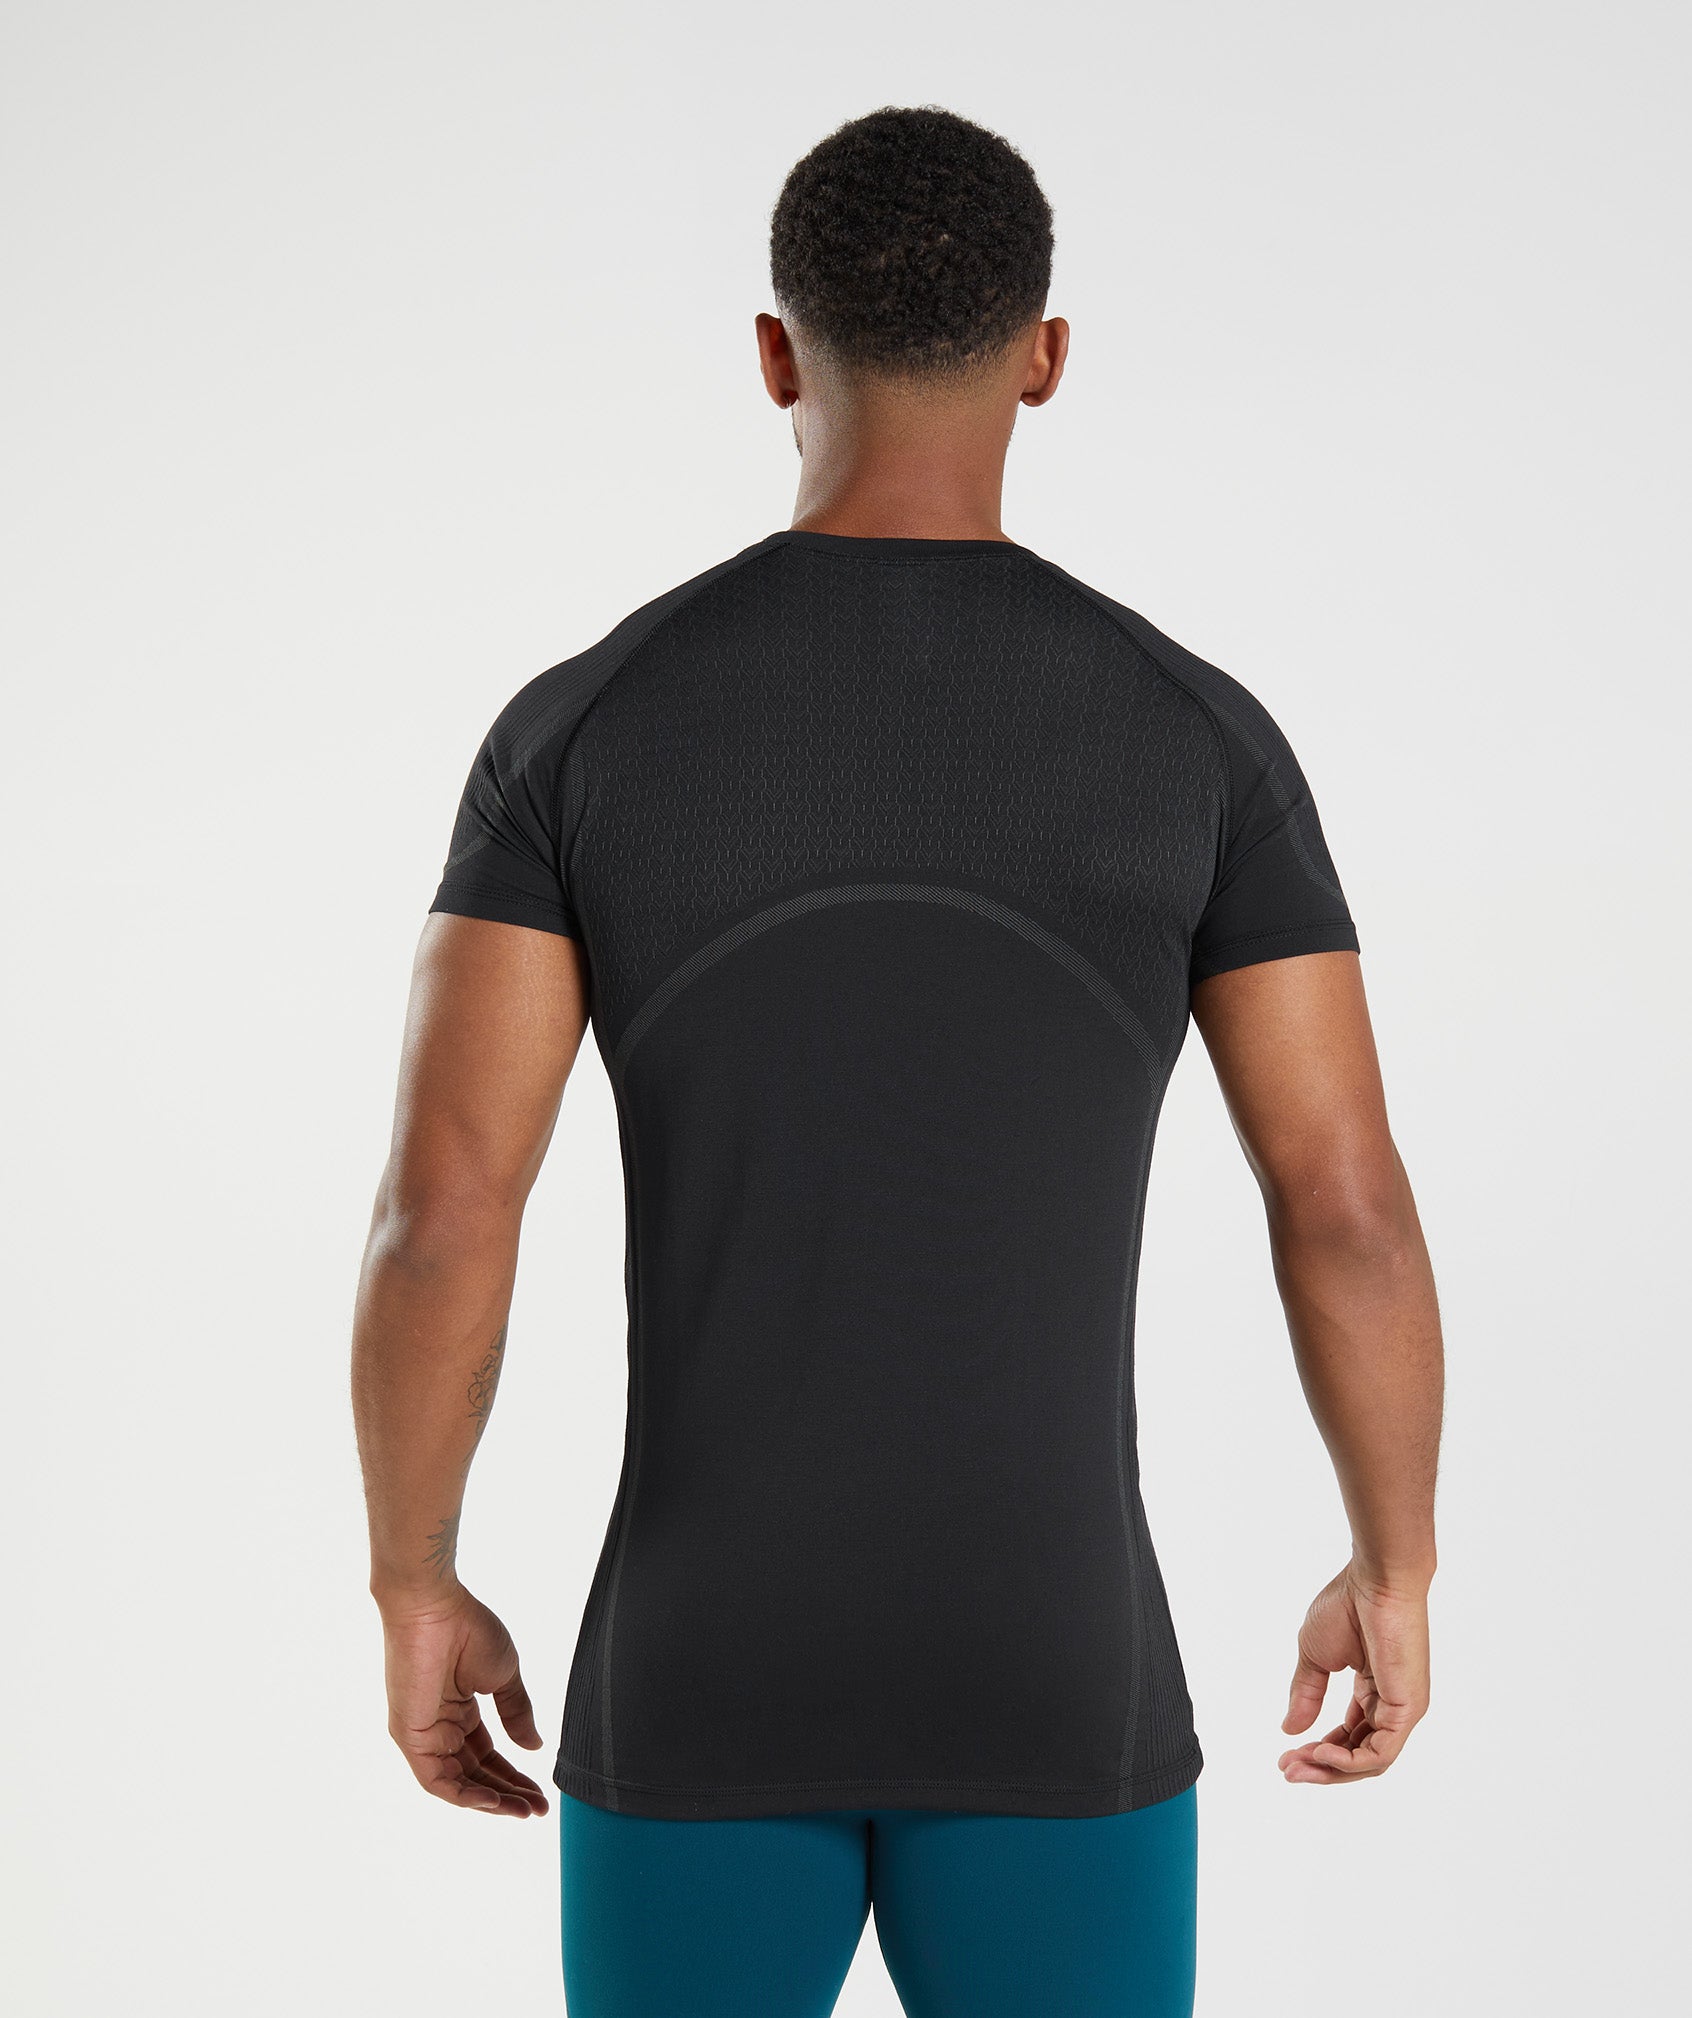 315 Seamless T-Shirt in Black - view 3